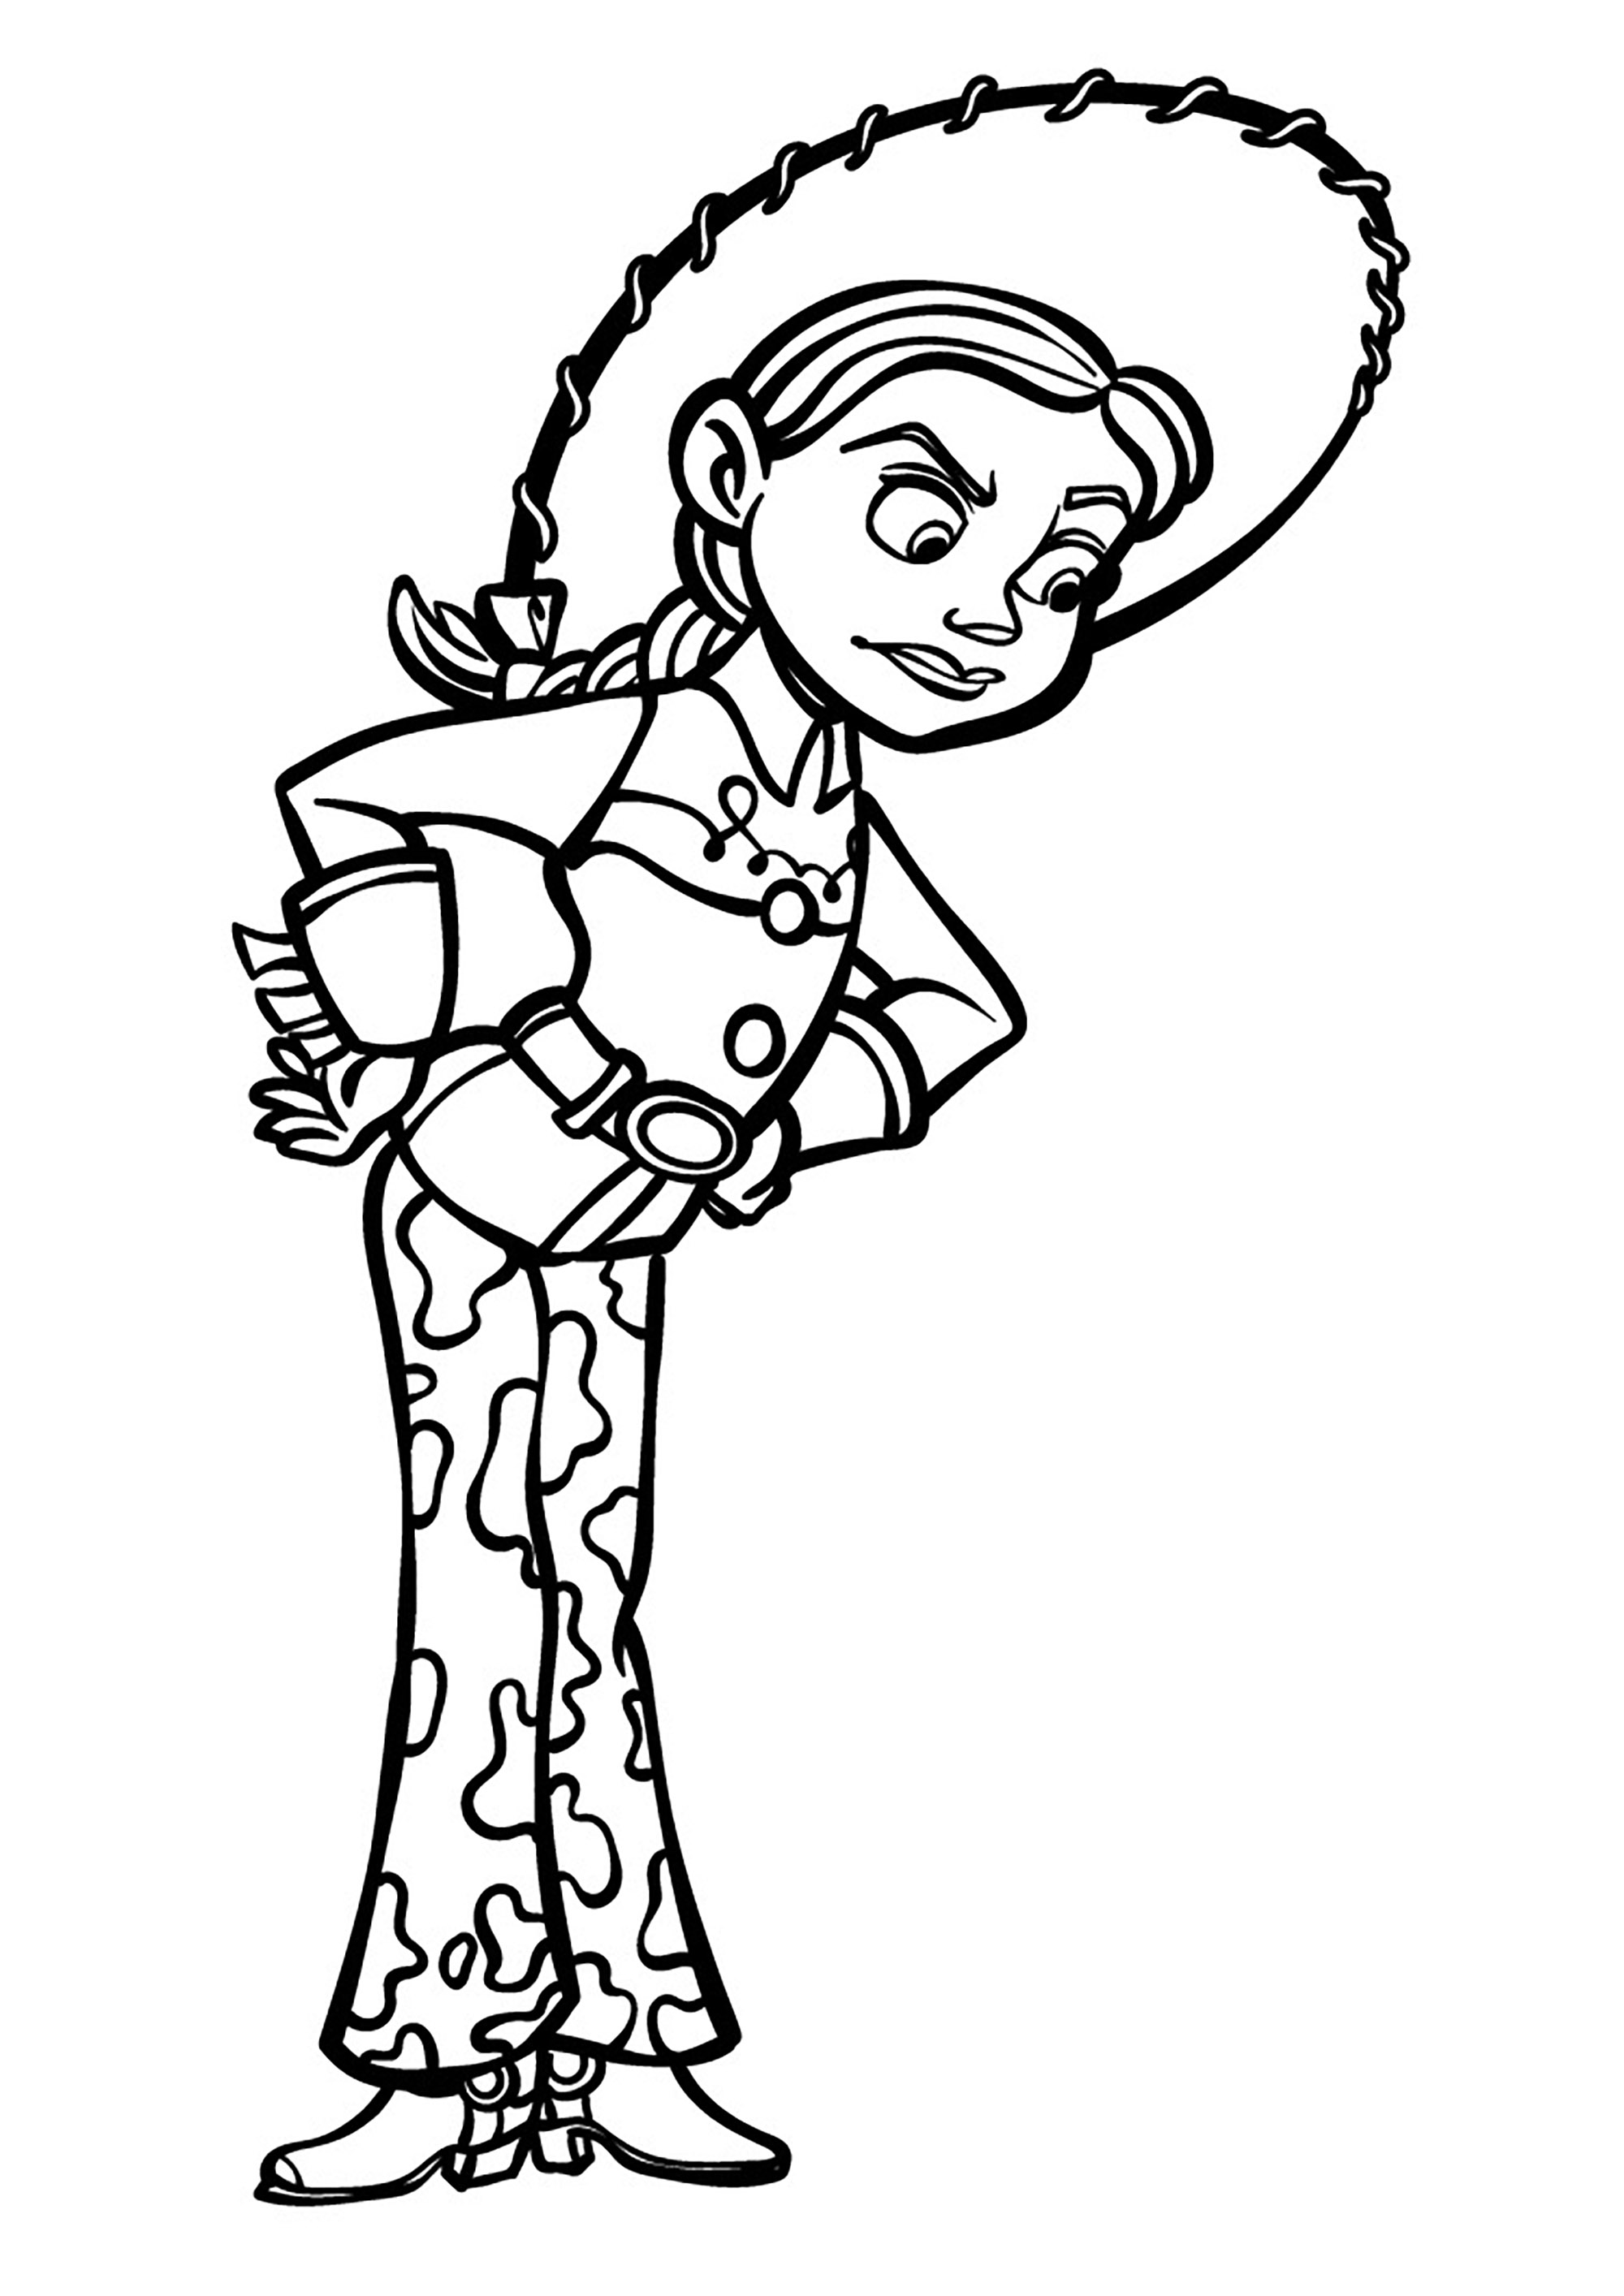 Toy Story coloring page to download for free